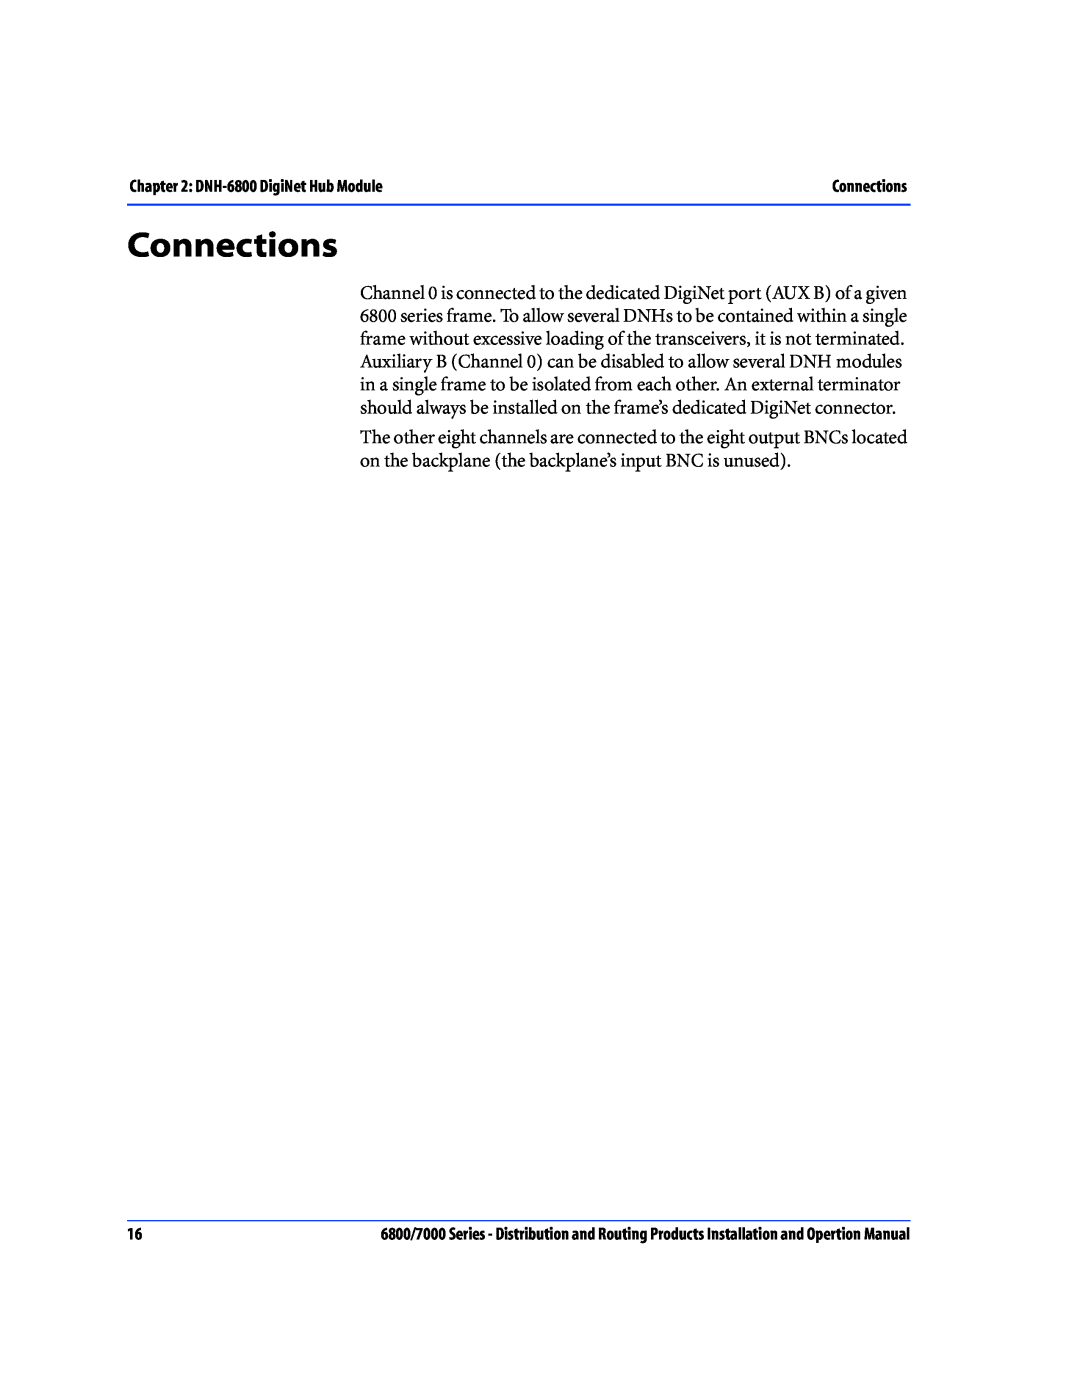 Nokia 7000 Series, 6800 Series operation manual Connections 